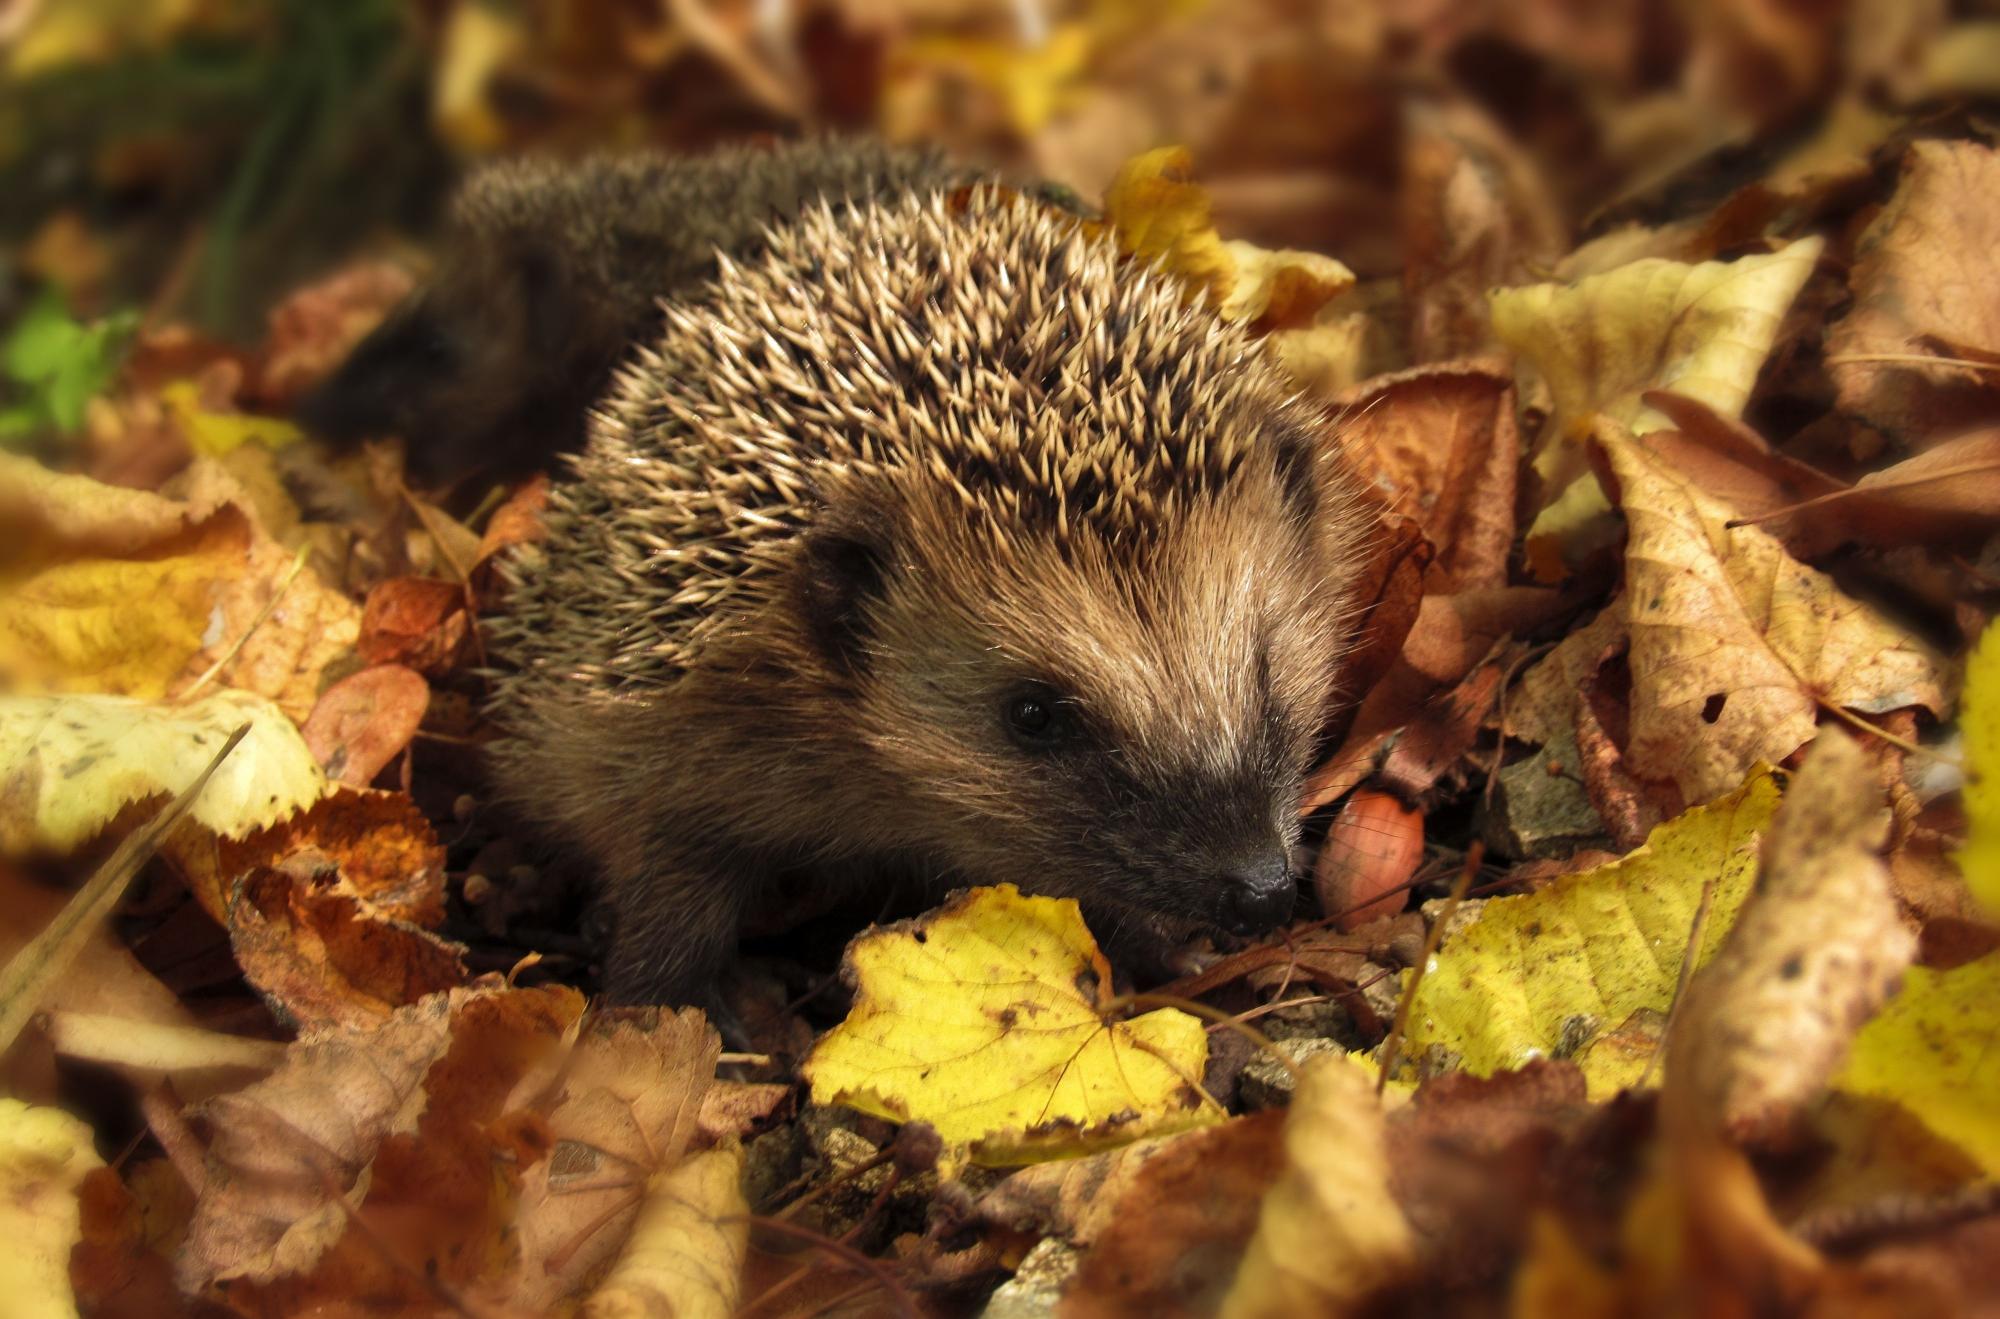 Hedgehog sitting amongst yellow, red and orange autumn leaves